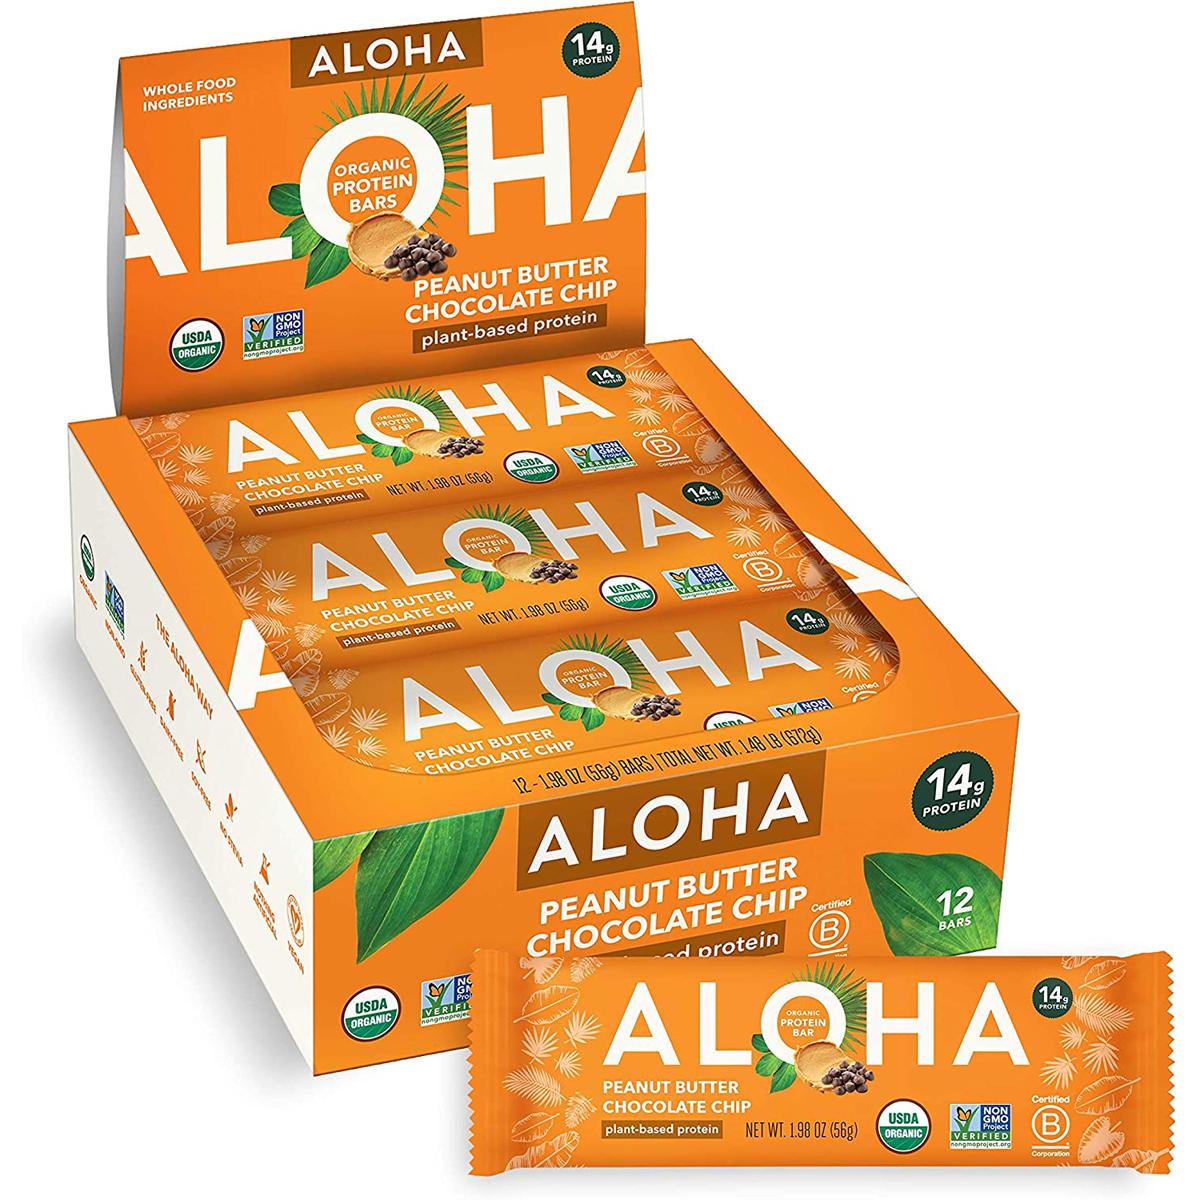 Aloha Organic Plant Based Protein Bars Peanut Butter 12 Pack for $14.14 Shipped